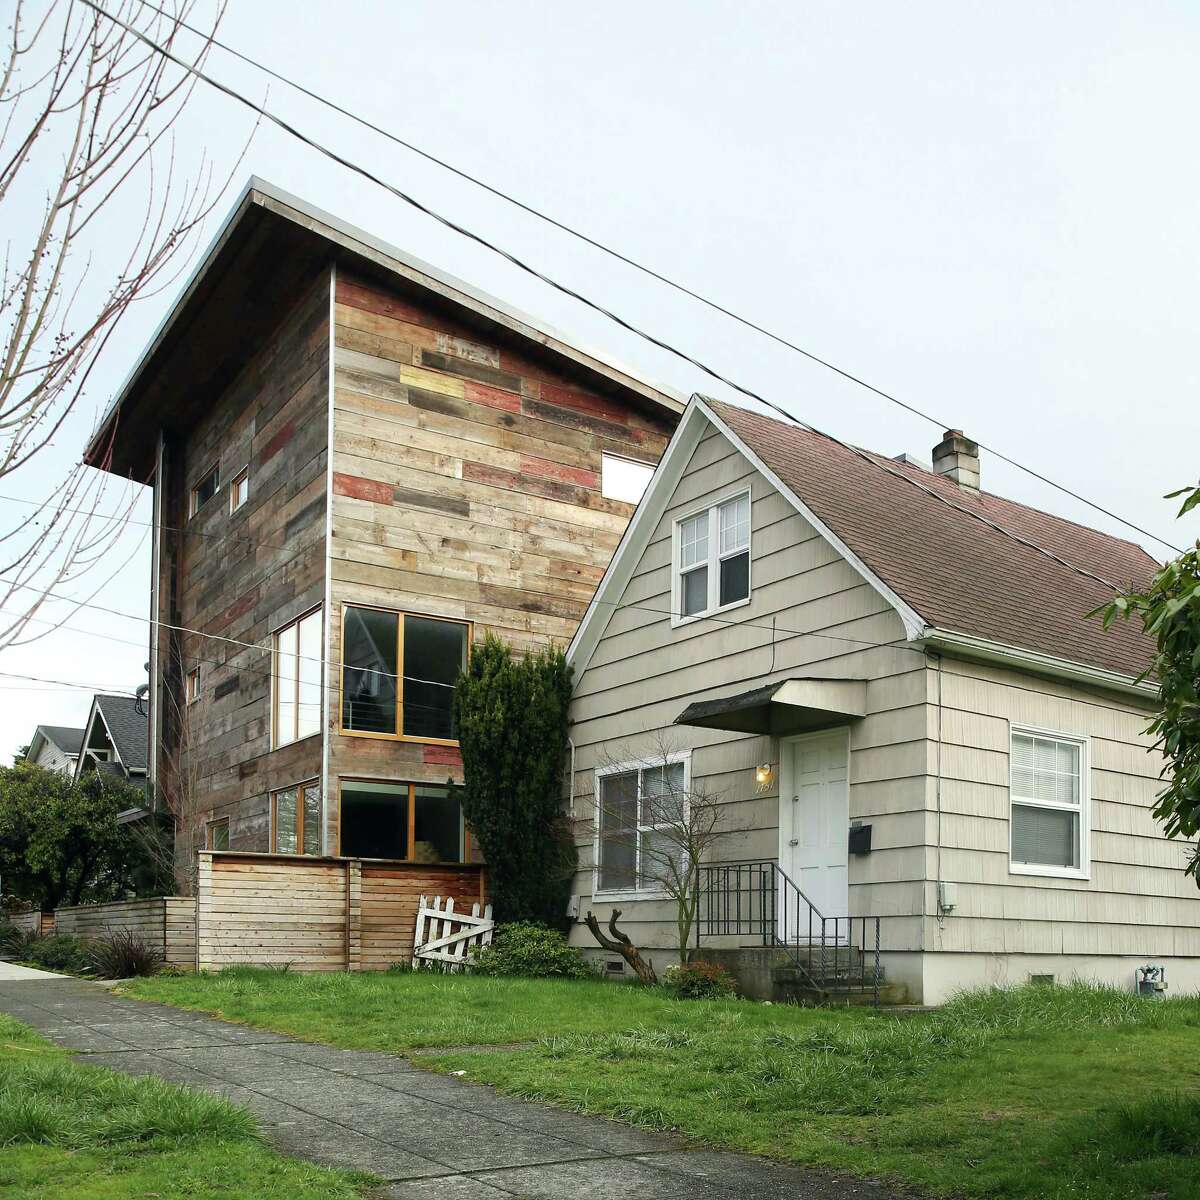 Seattle's changing a lot these days (pictured above: A two-bedroom house built in 1900 next to a modern three-bedroom built in 2015 on NW 61st Street in Ballard). But the quintessential "Seattle style" has had some mainstays over the years. (Genna Martin, seattlepi.com)